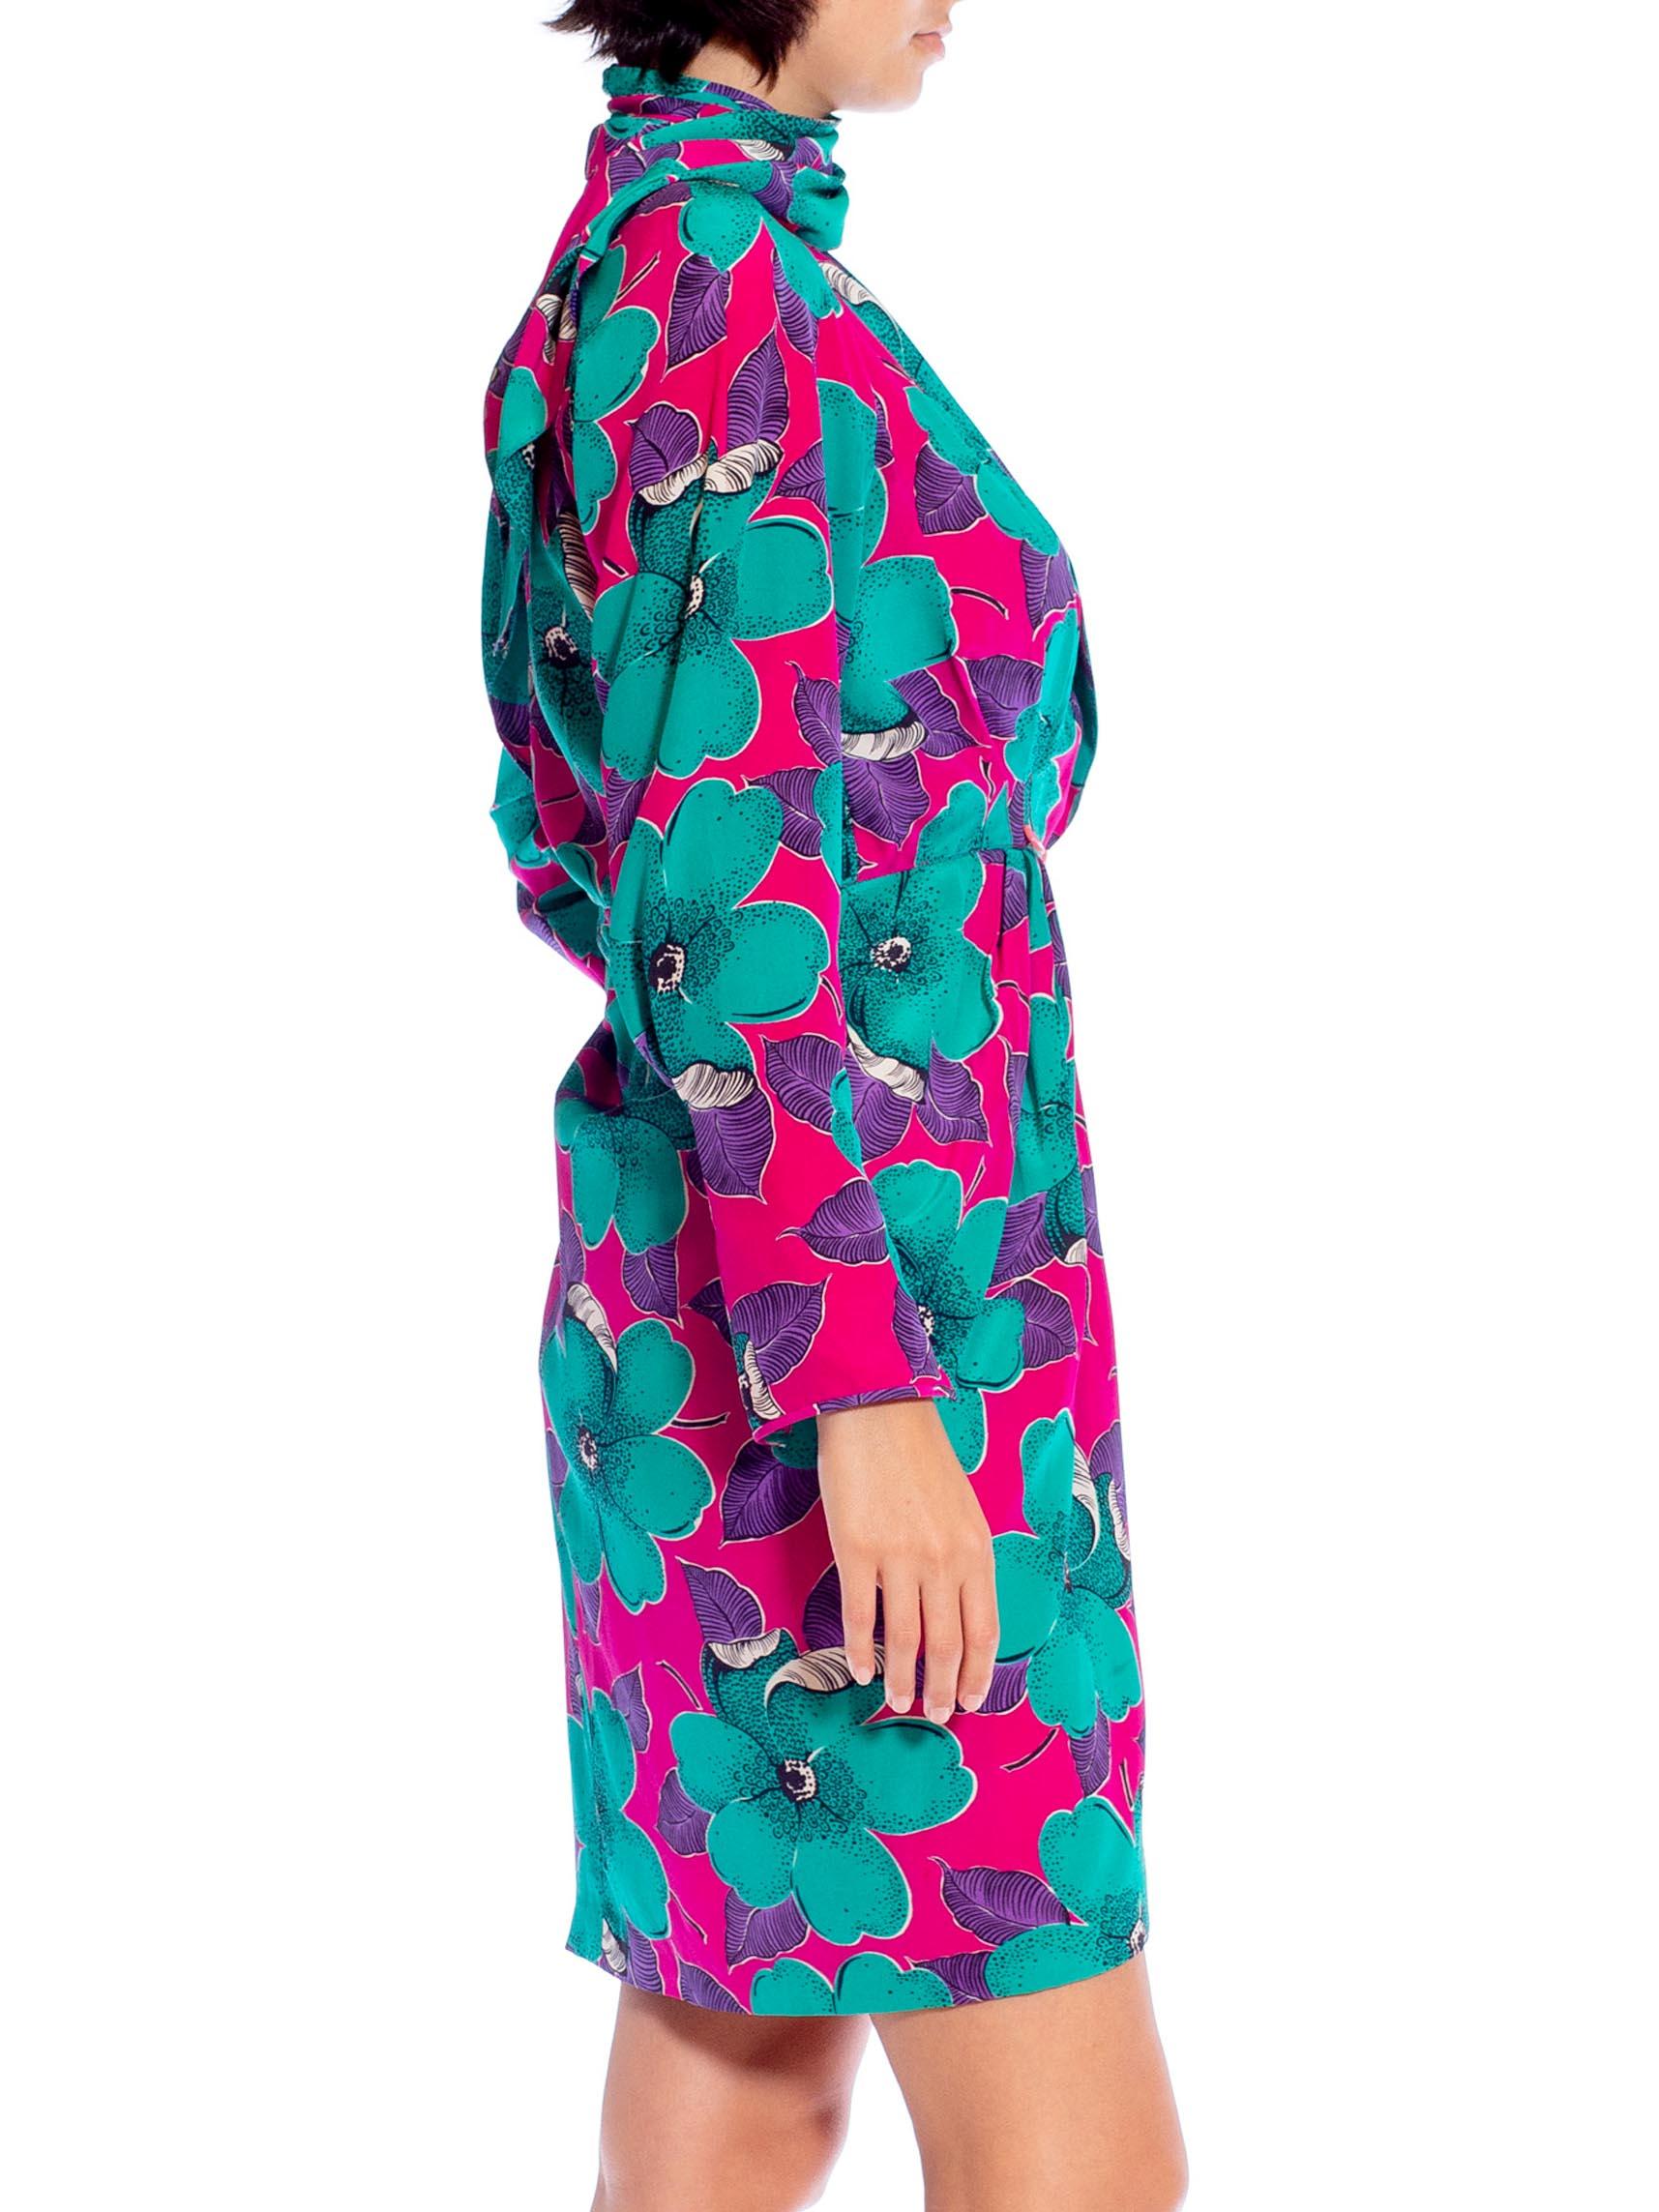 1980S EMANUEL UNGARO Hot Pink Floral Silk Dress In Excellent Condition For Sale In New York, NY